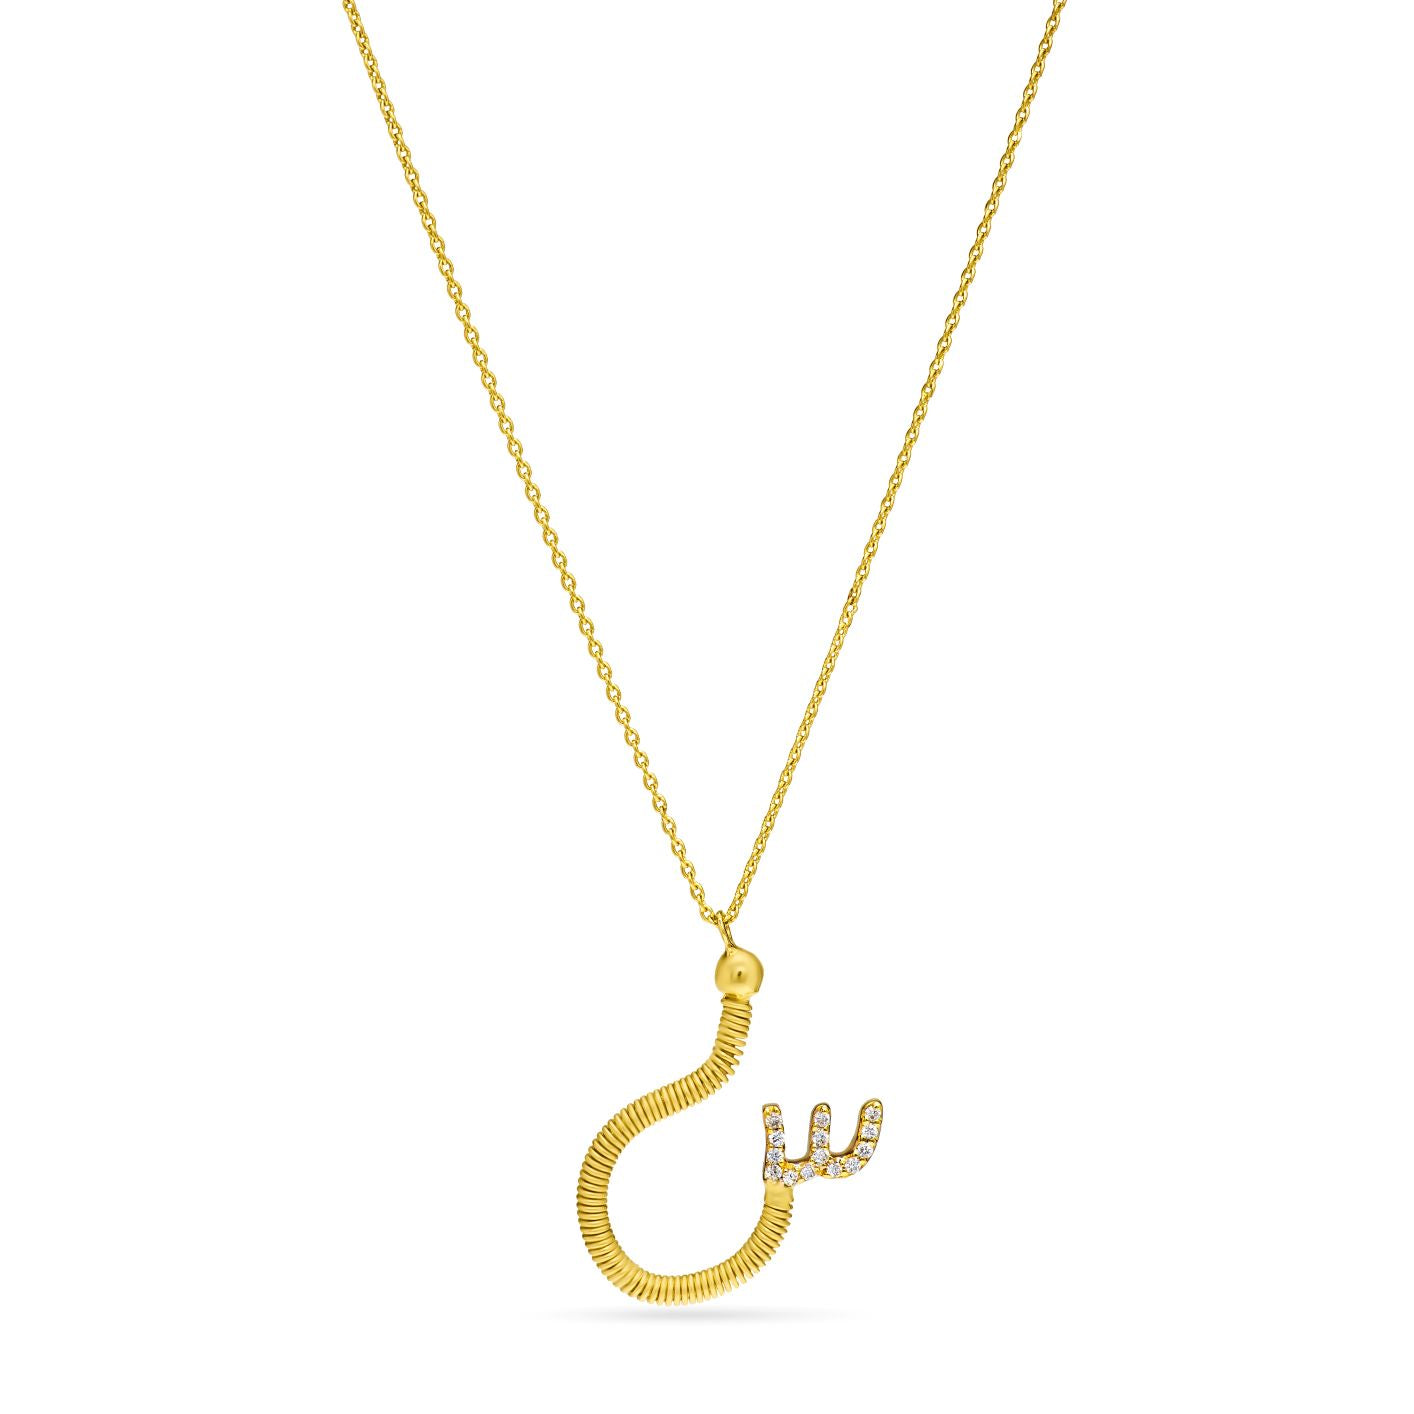 Shiny Letter "Seen" Gold Necklace in Yellow 18 K Gold - SIR1682P